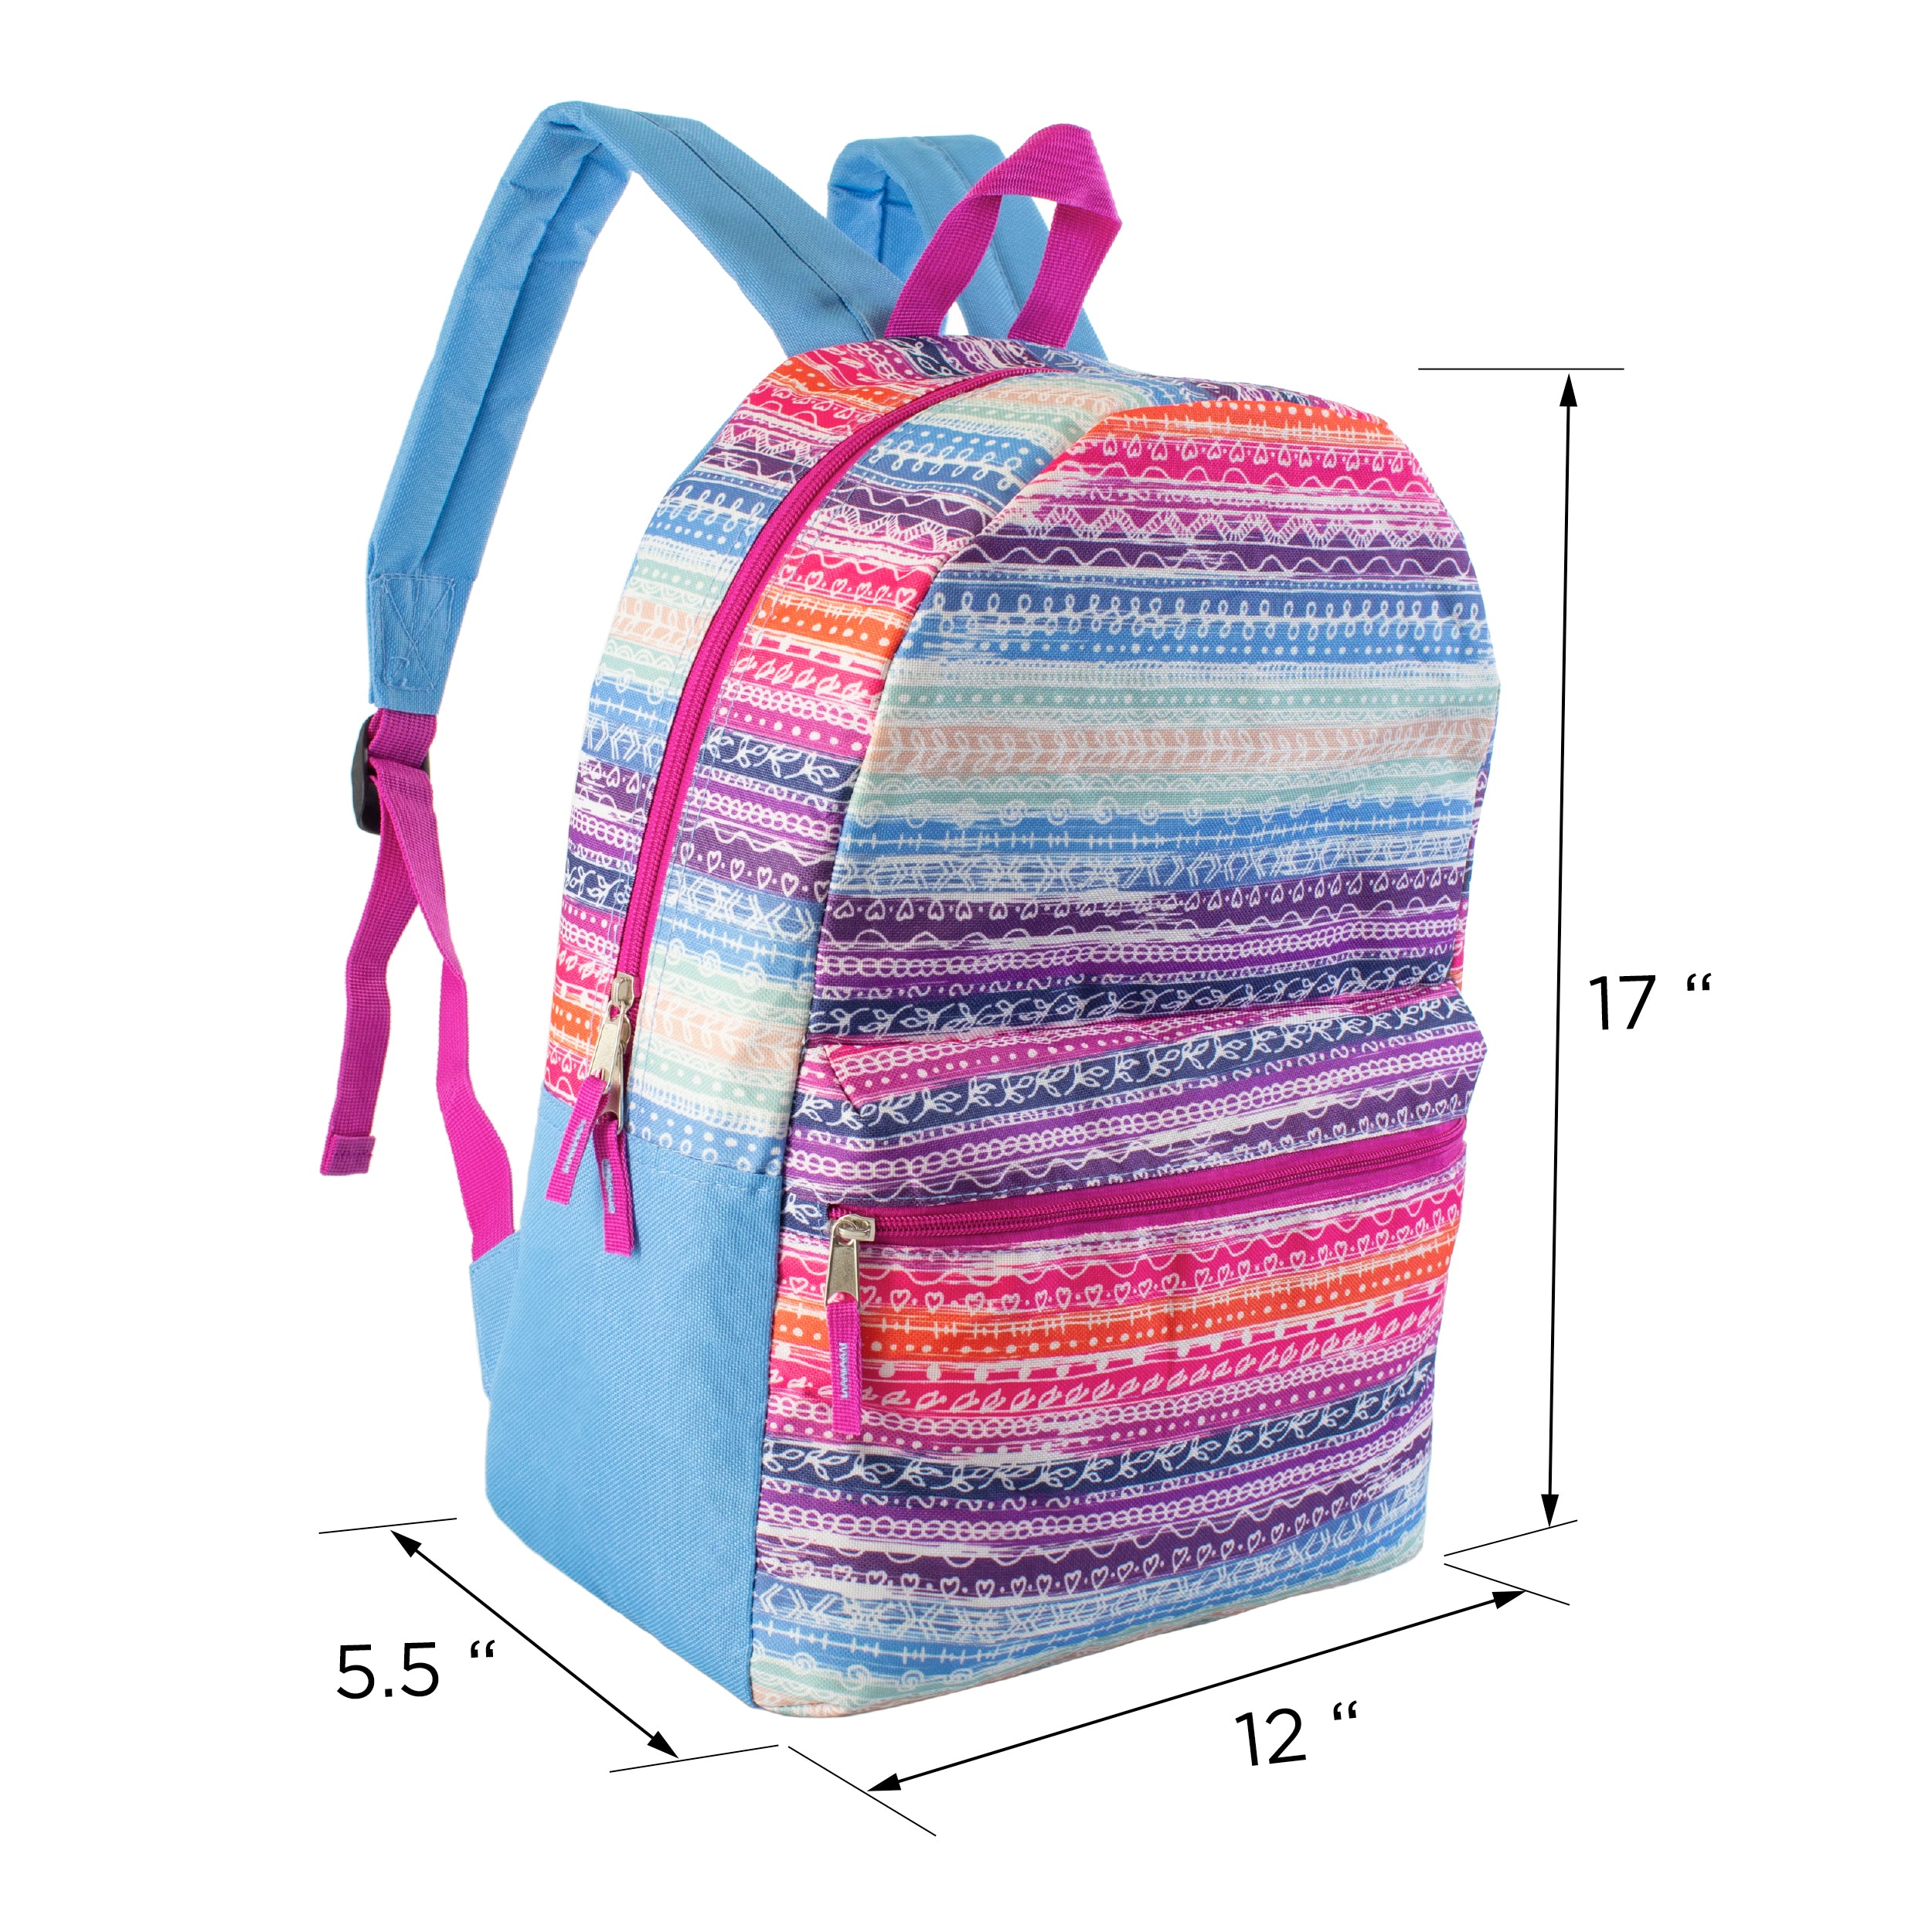 12 Wholesale 17" Backpacks in Assorted Designs & 12 Bulk School Supply Kits of Your Choice